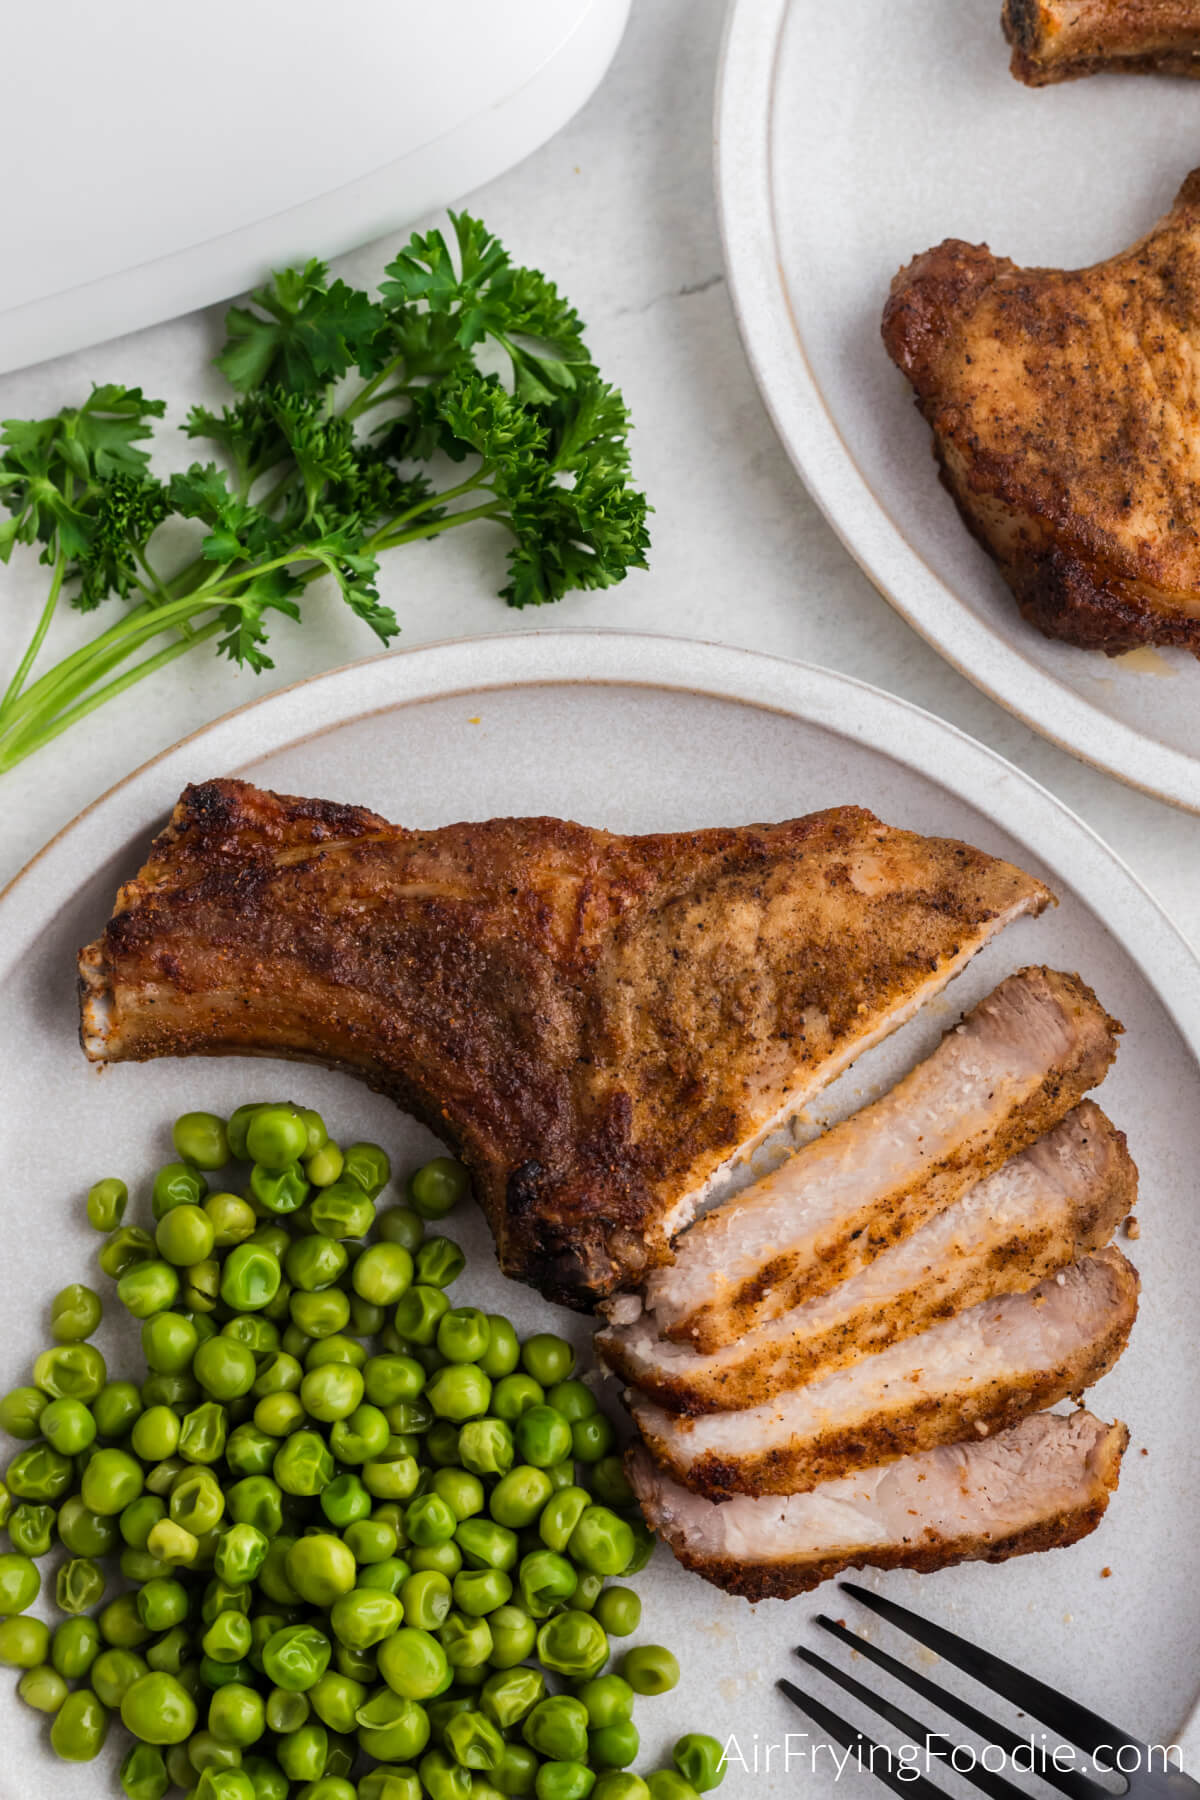 Pork steak air fried and sliced on a white plate with a side of green peas.